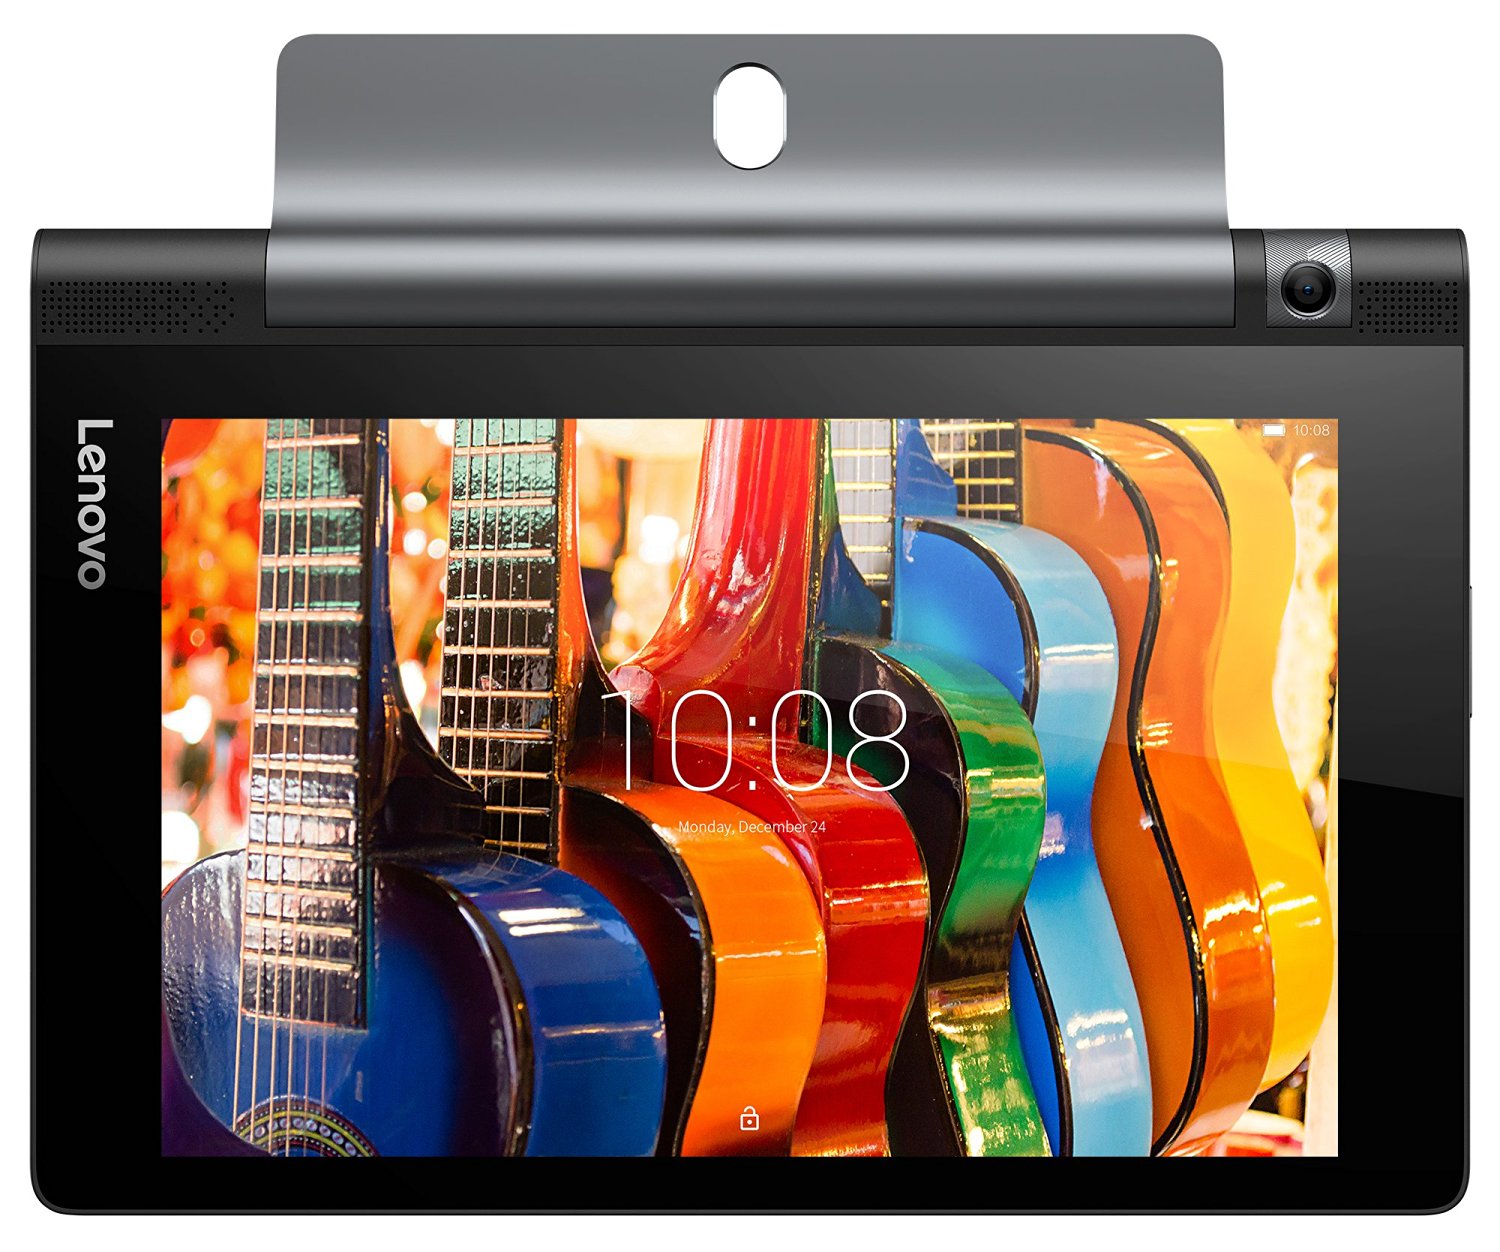 Lenovo Yoga Tab 3 8 Tablet (8 inch, 16GB, Wi-Fi + 4G), Slate Black -Only on Amazon.in